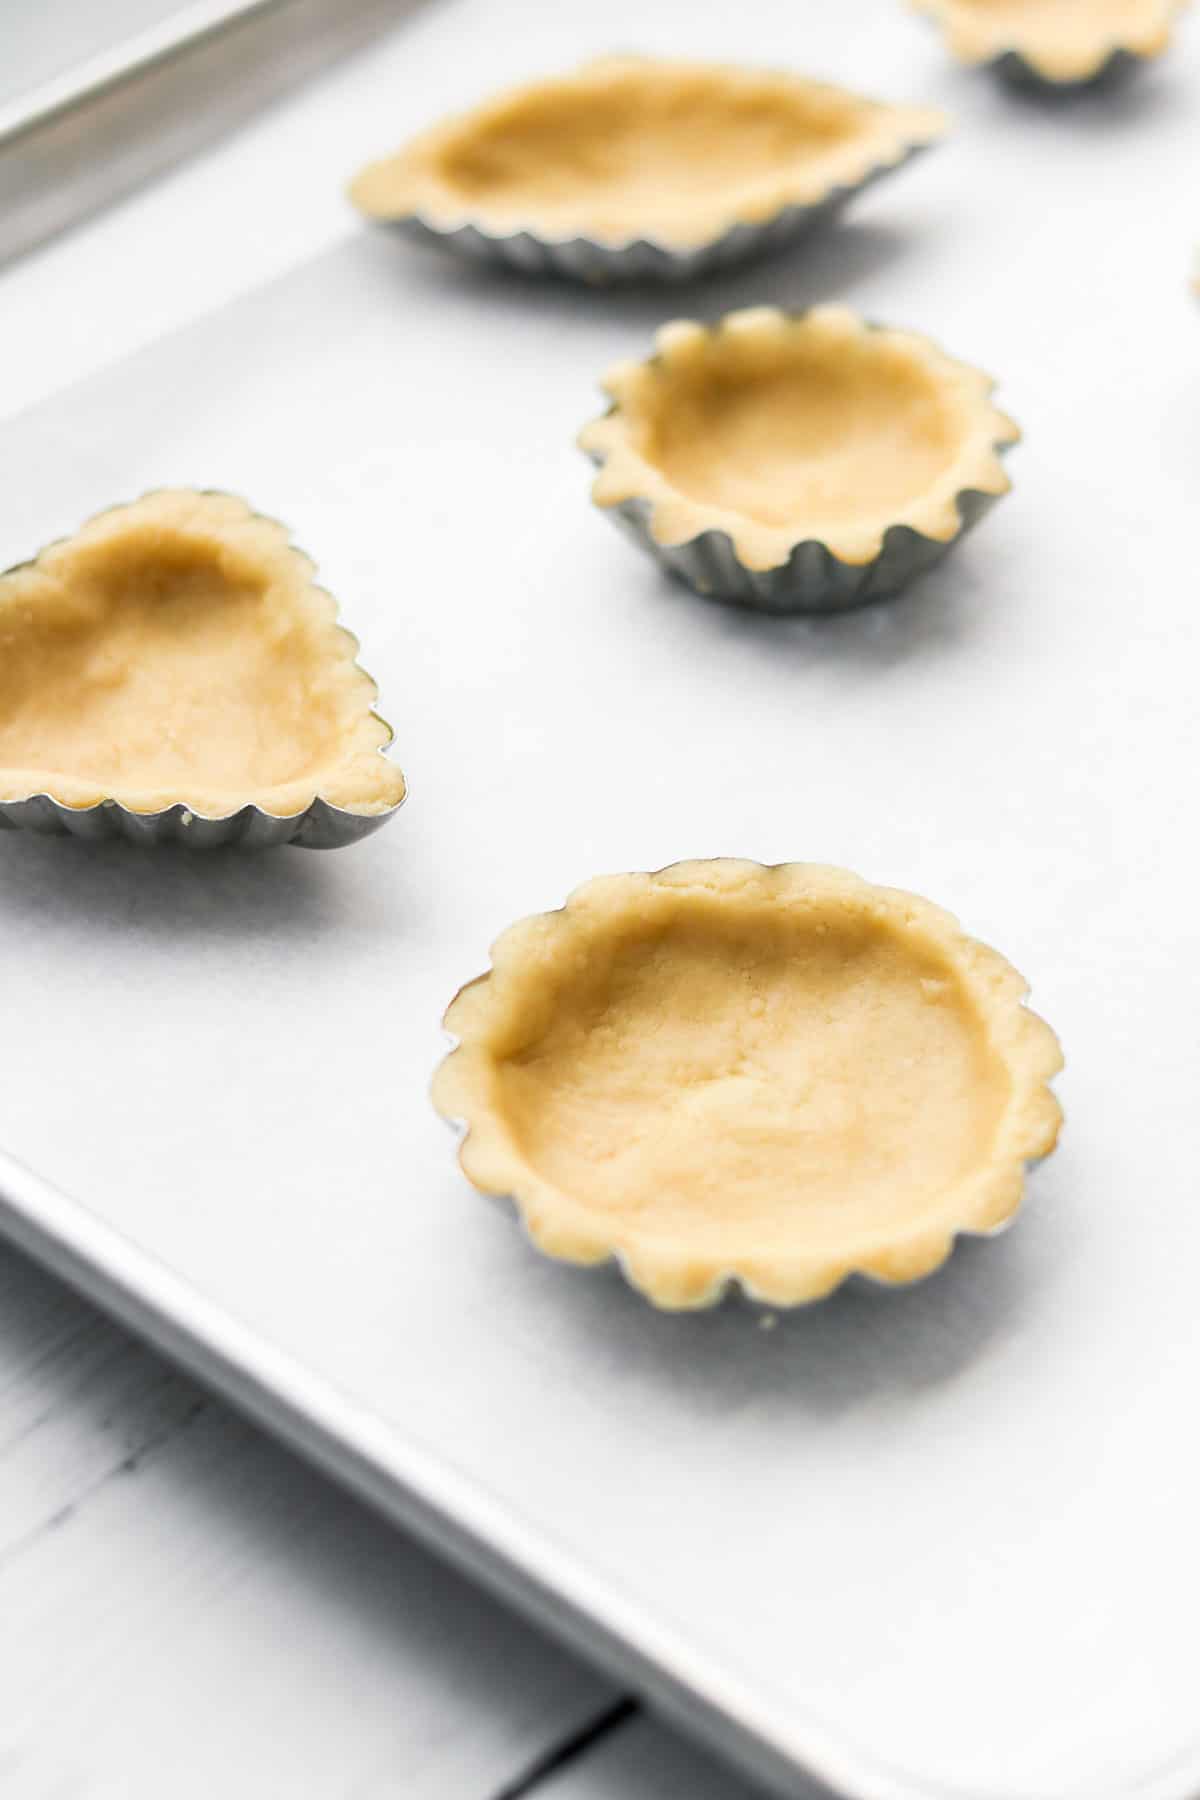 Unbaked Scandinavian Almond Tarts on a cookie sheet lined with parchment paper.